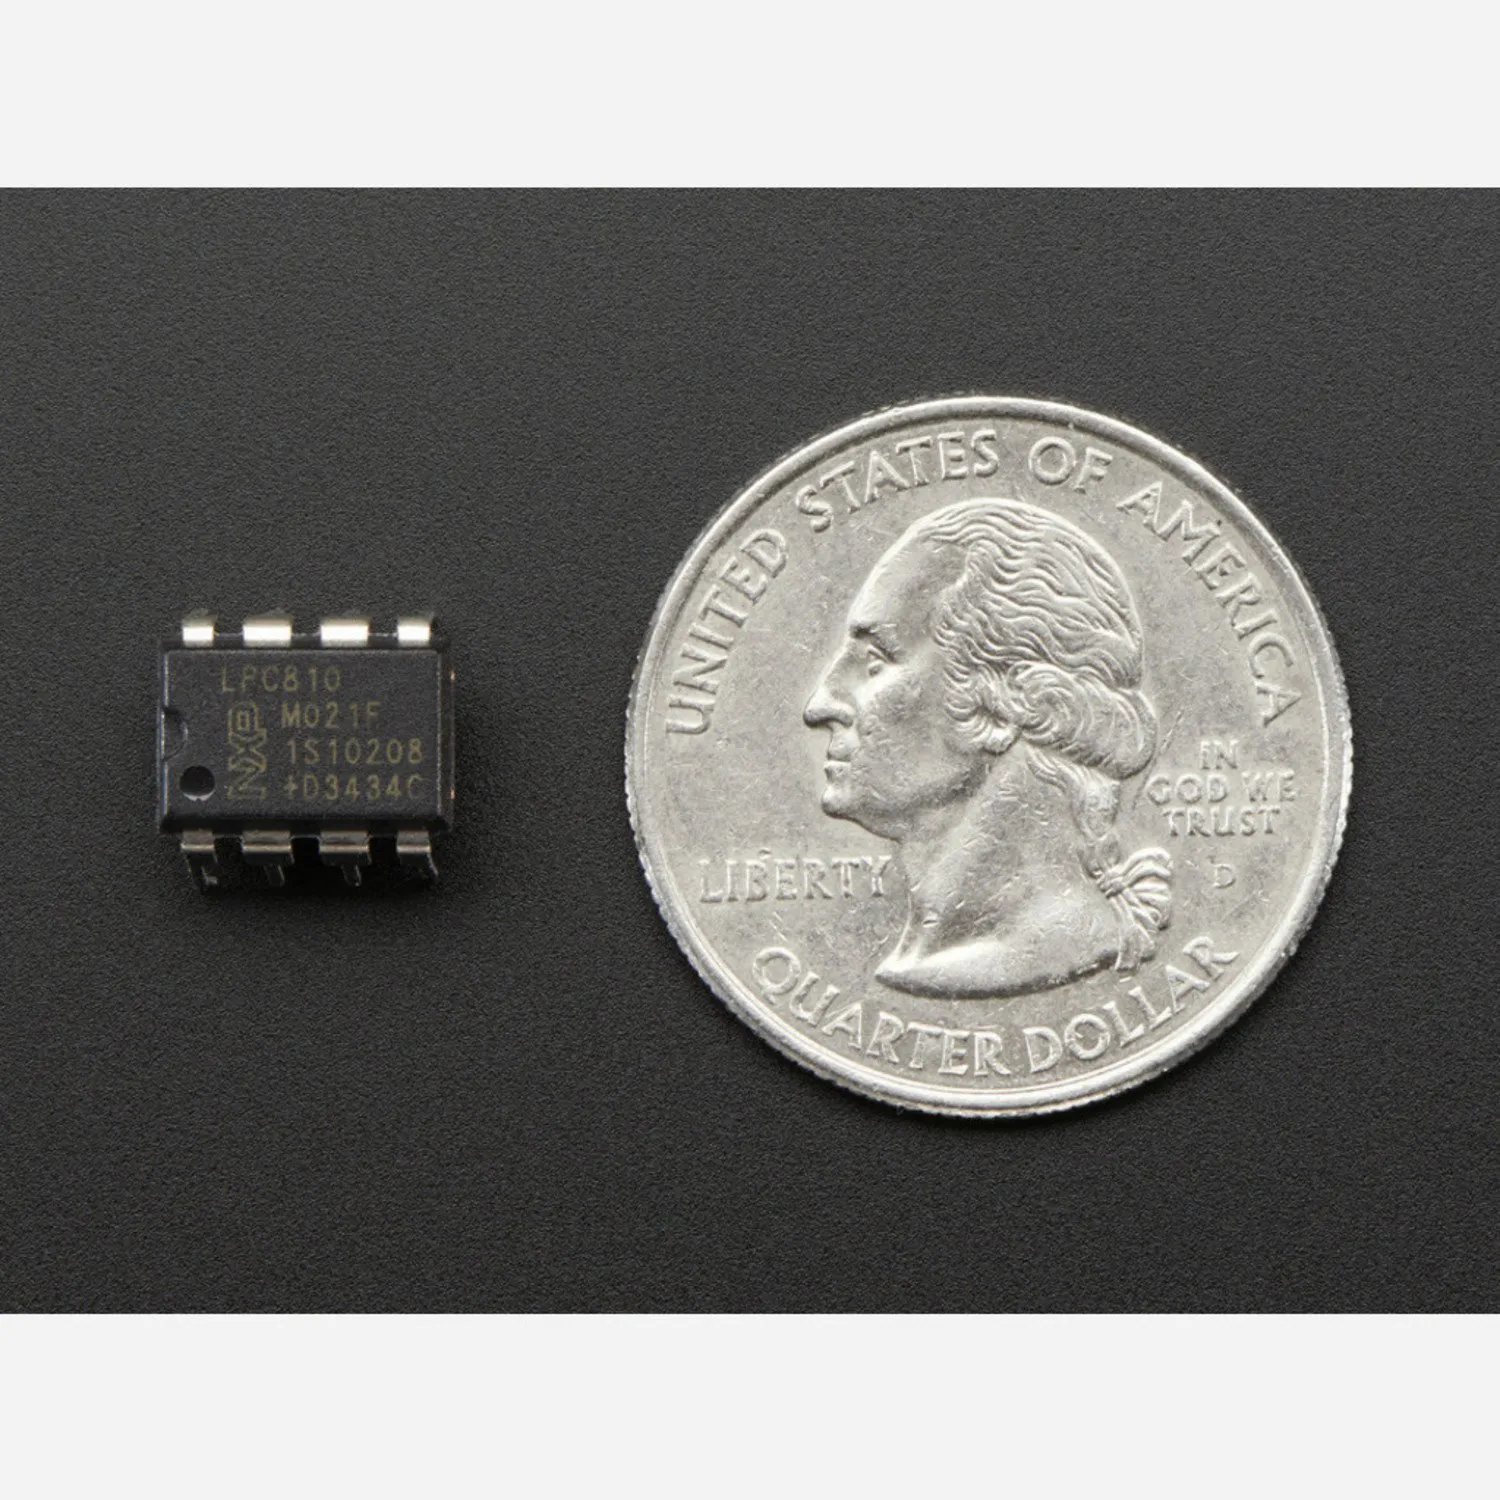 Photo of DSP-G1 Voice Chip